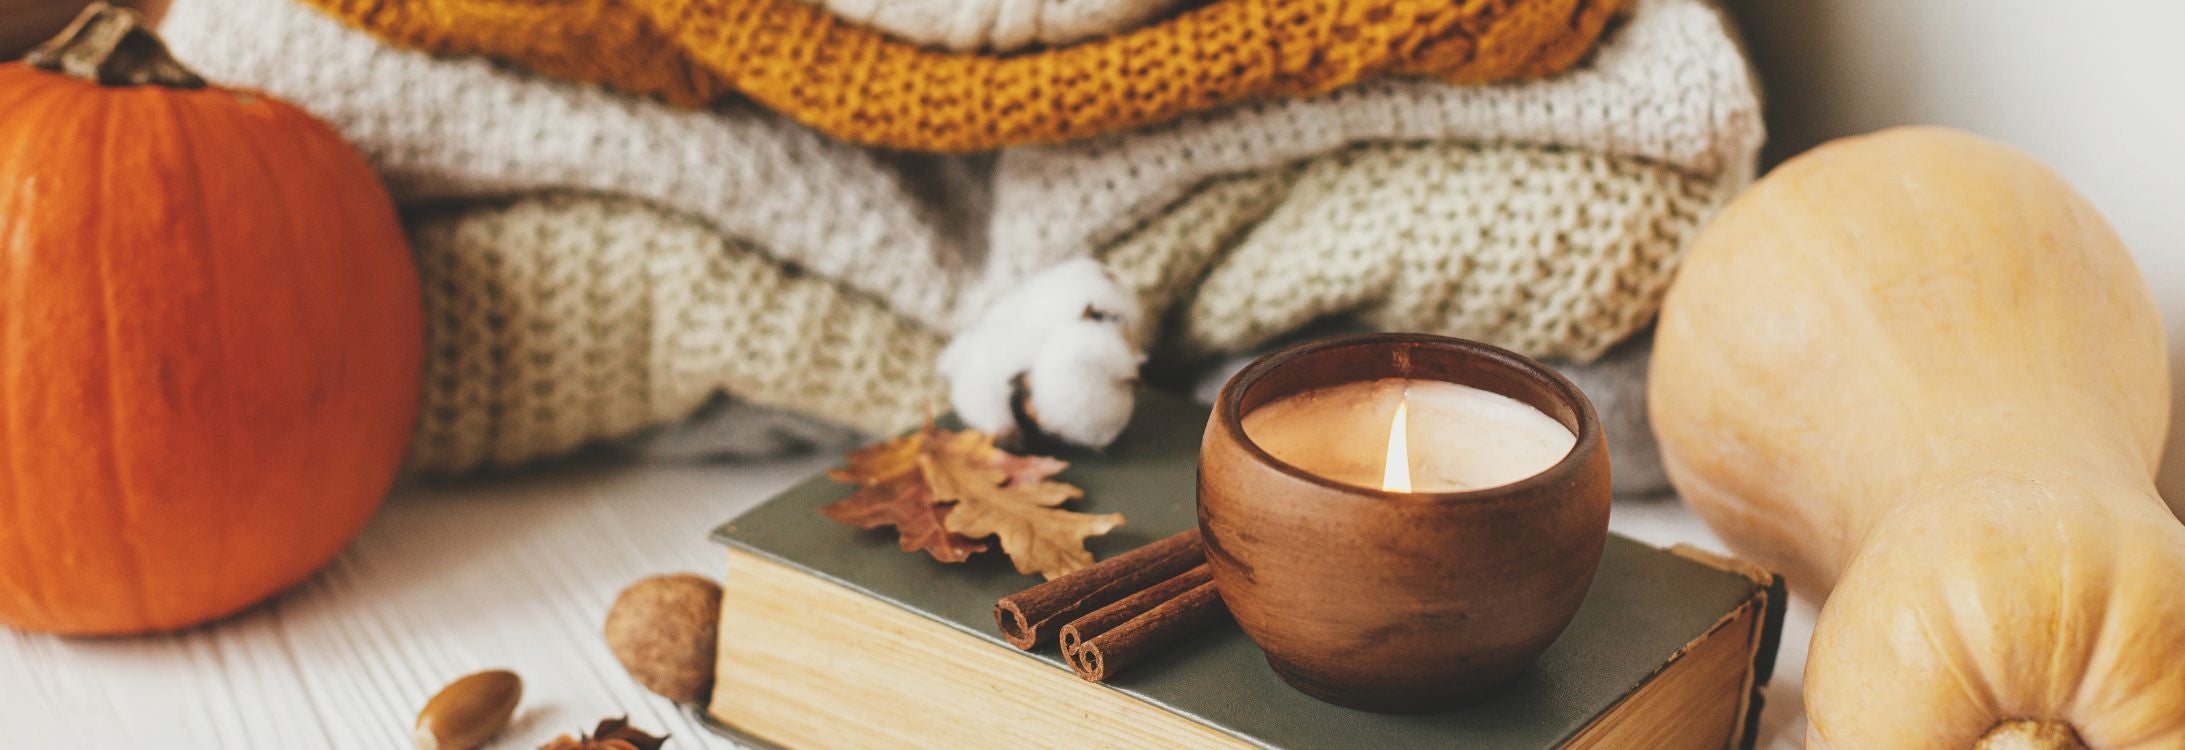 Fall decor and candle - Making the Most of Shorter Days blog cover